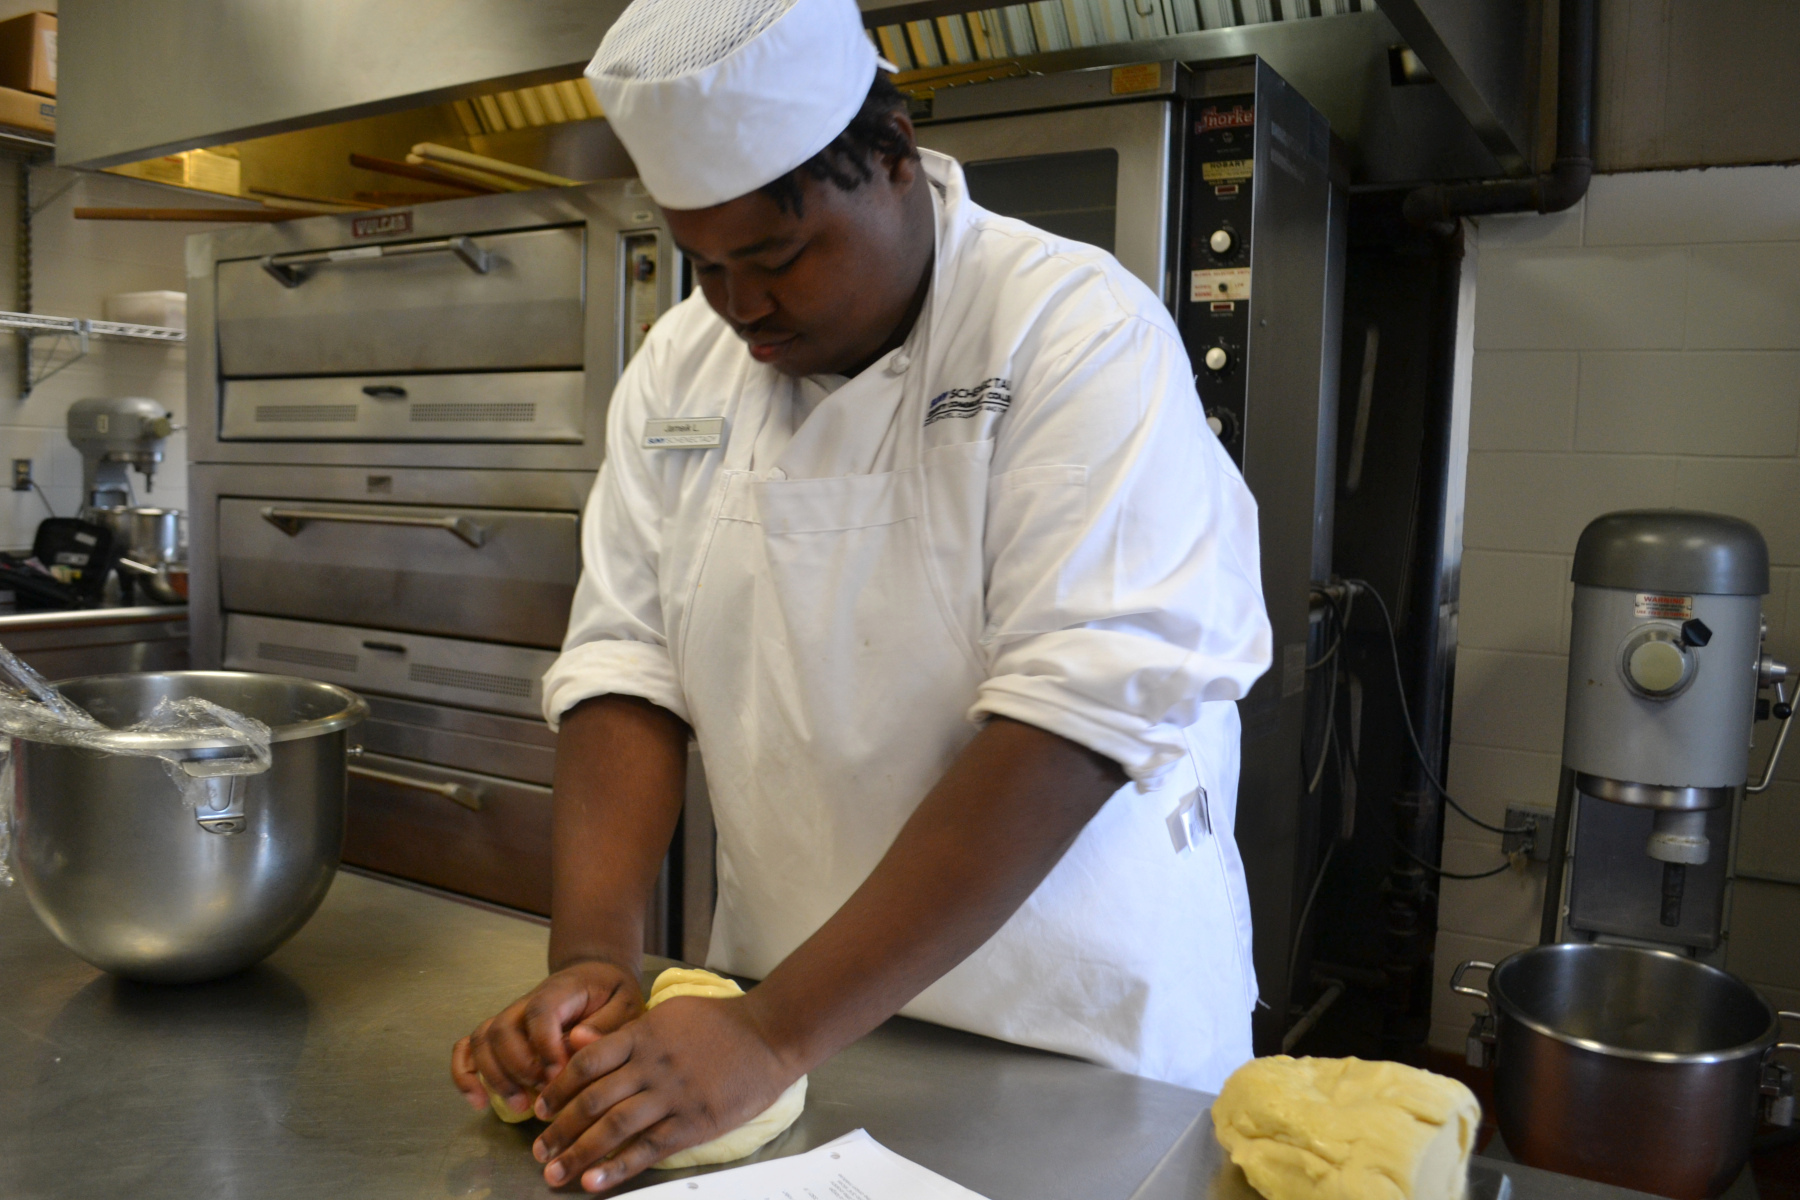 Student kneading dough, making bread in Baking Lab